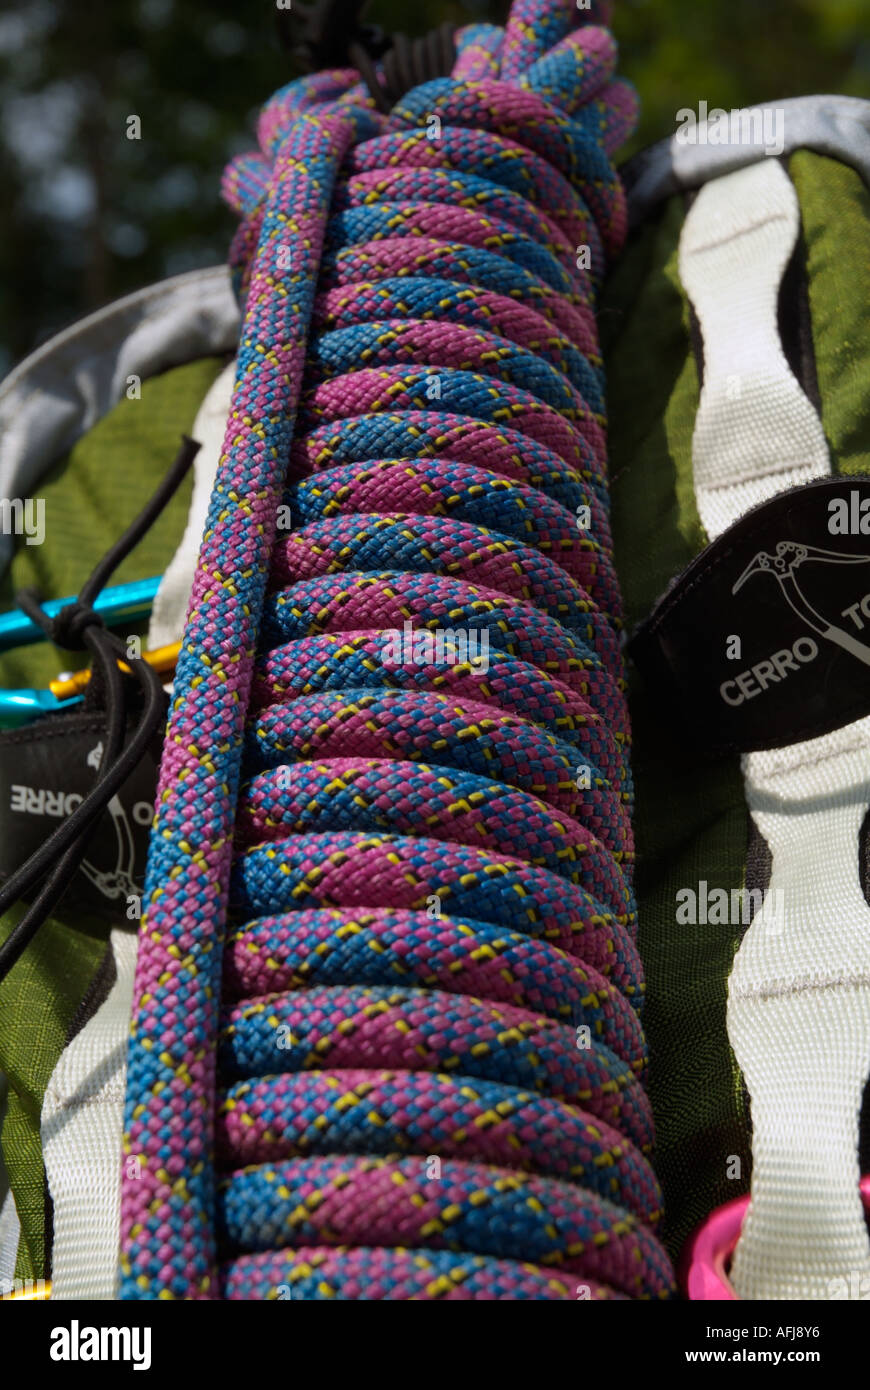 https://c8.alamy.com/comp/AFJ8Y6/a-purple-climbing-rope-attached-to-a-backpack-AFJ8Y6.jpg